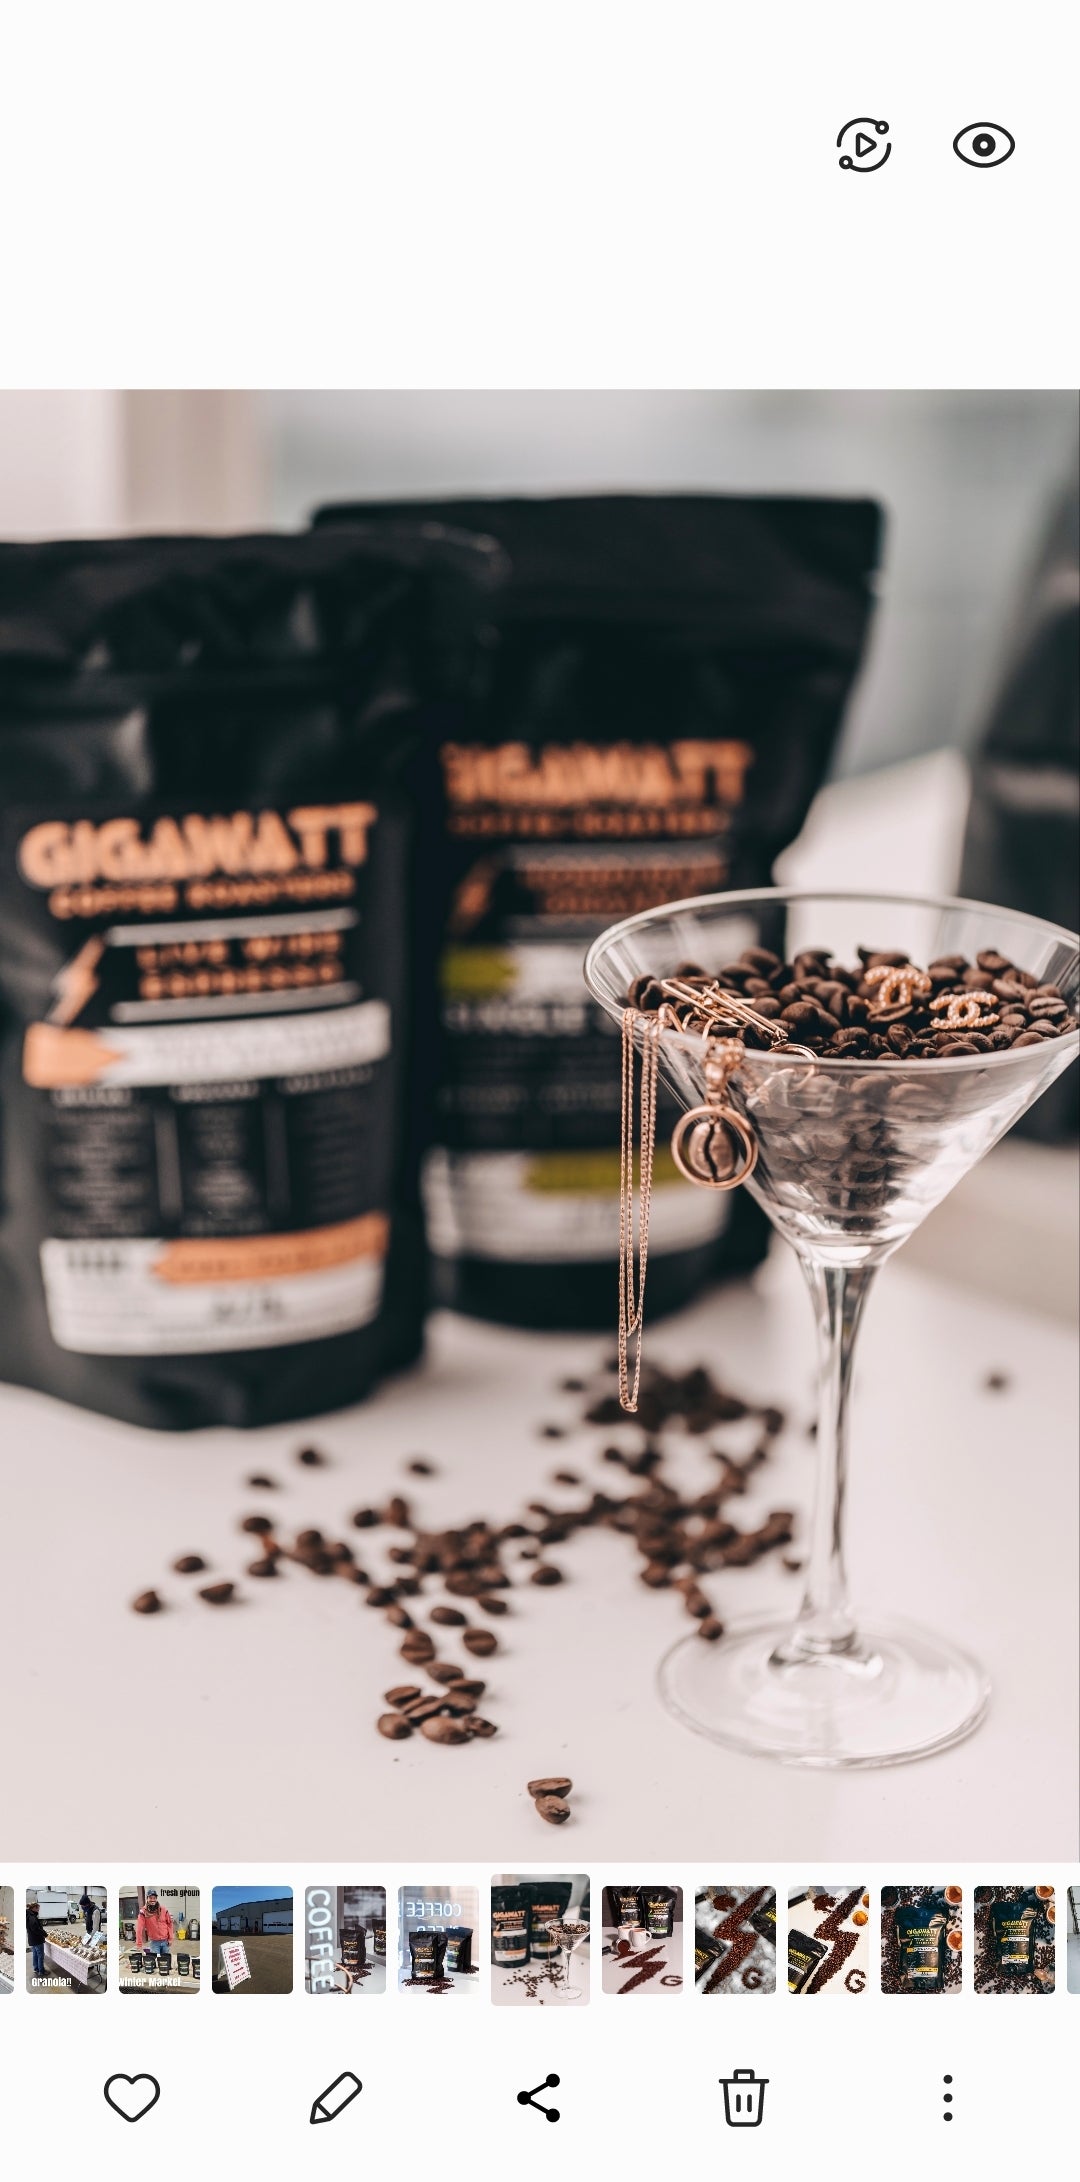 Gigawatt Artisanal Coffee Beans in Martini Glass with coffee bean necklace.